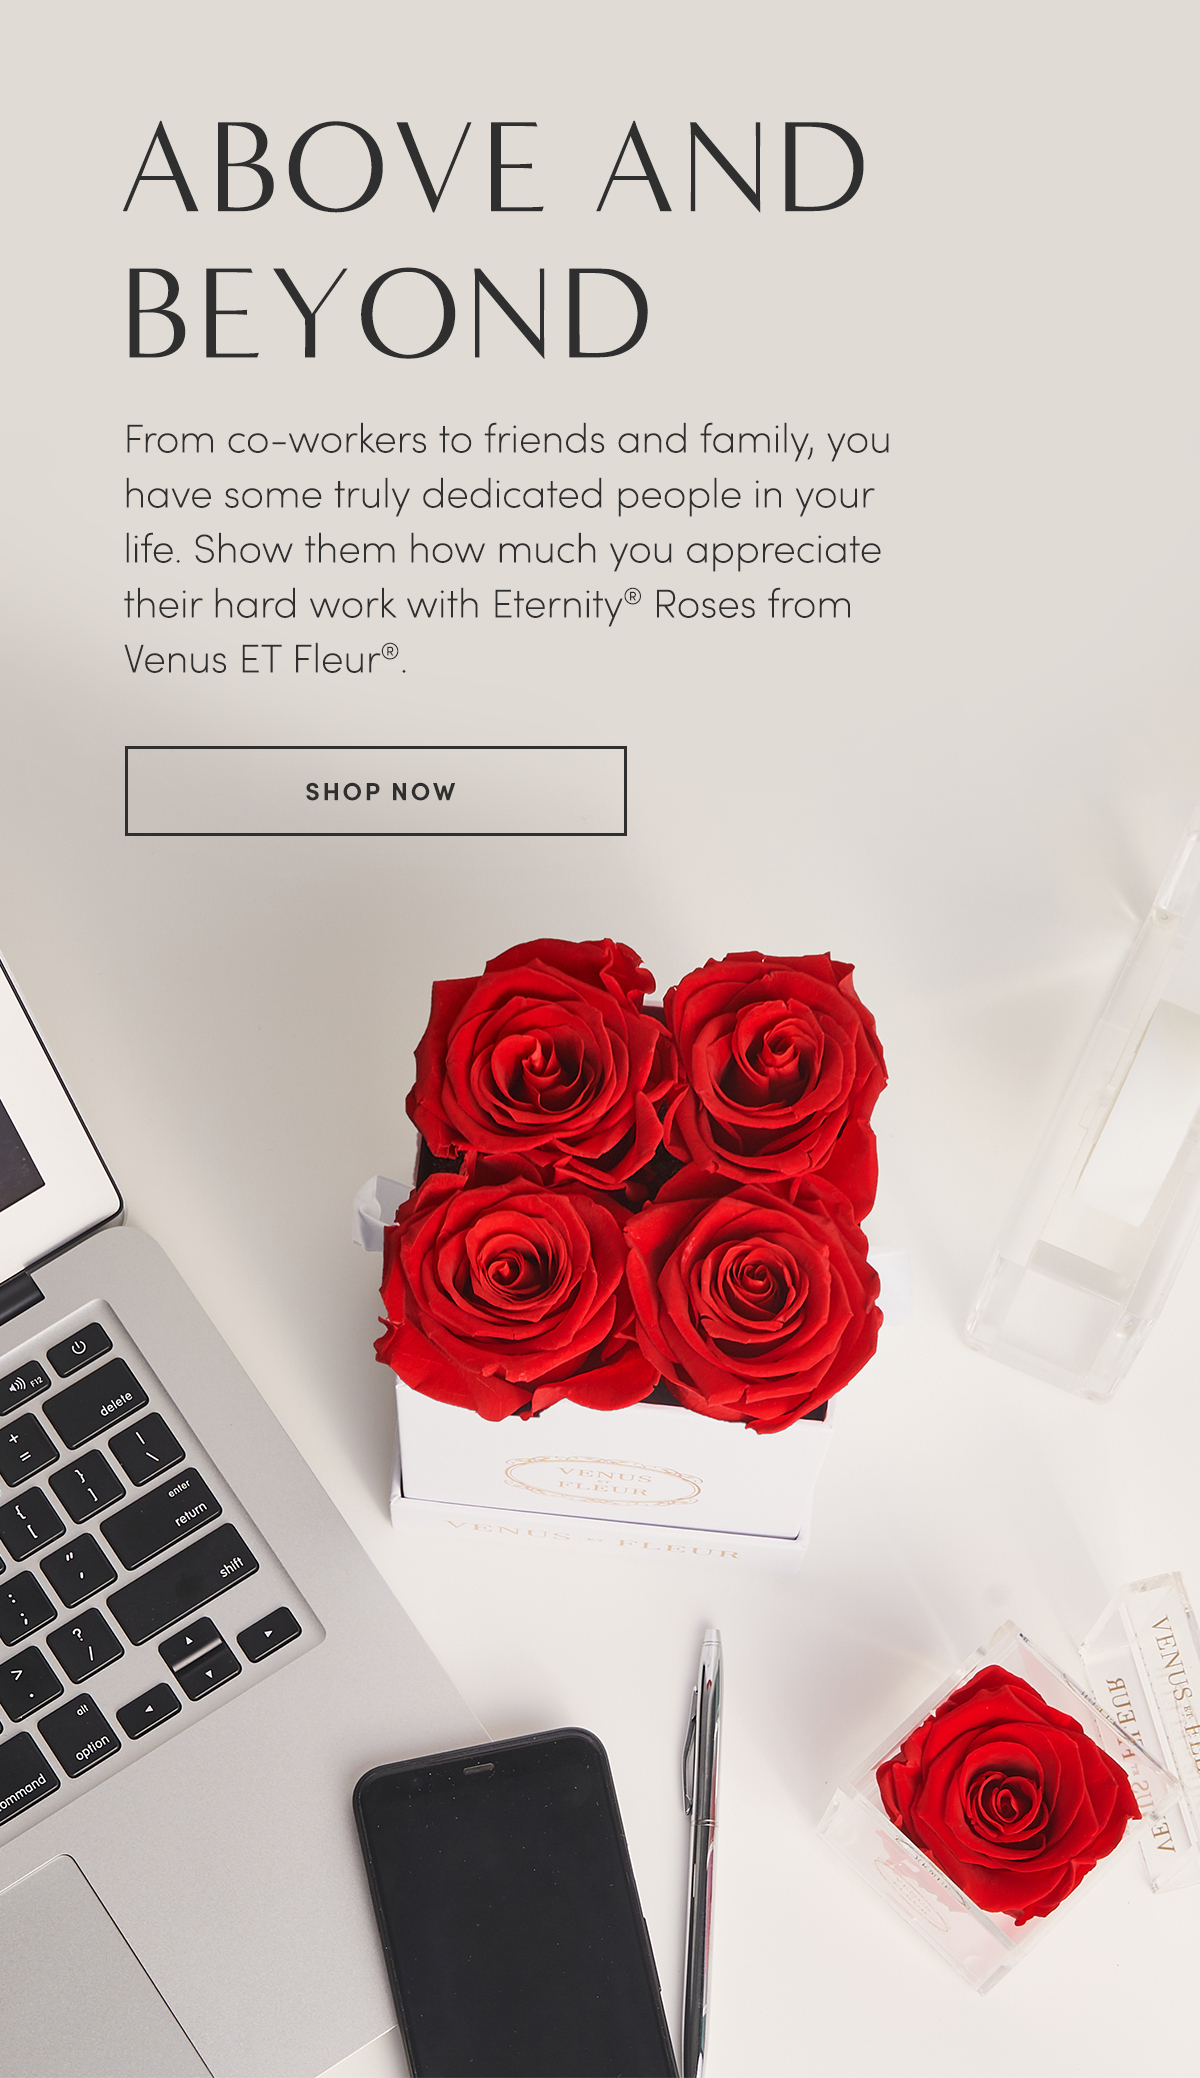 ABOVE AND BEYOND. From coworkers to friends and family, you have some truly dedicated people in your life. Show them how much you appreciate their hard work with Eternity? Roses from Venus ET Fleur?. SHOP NOW